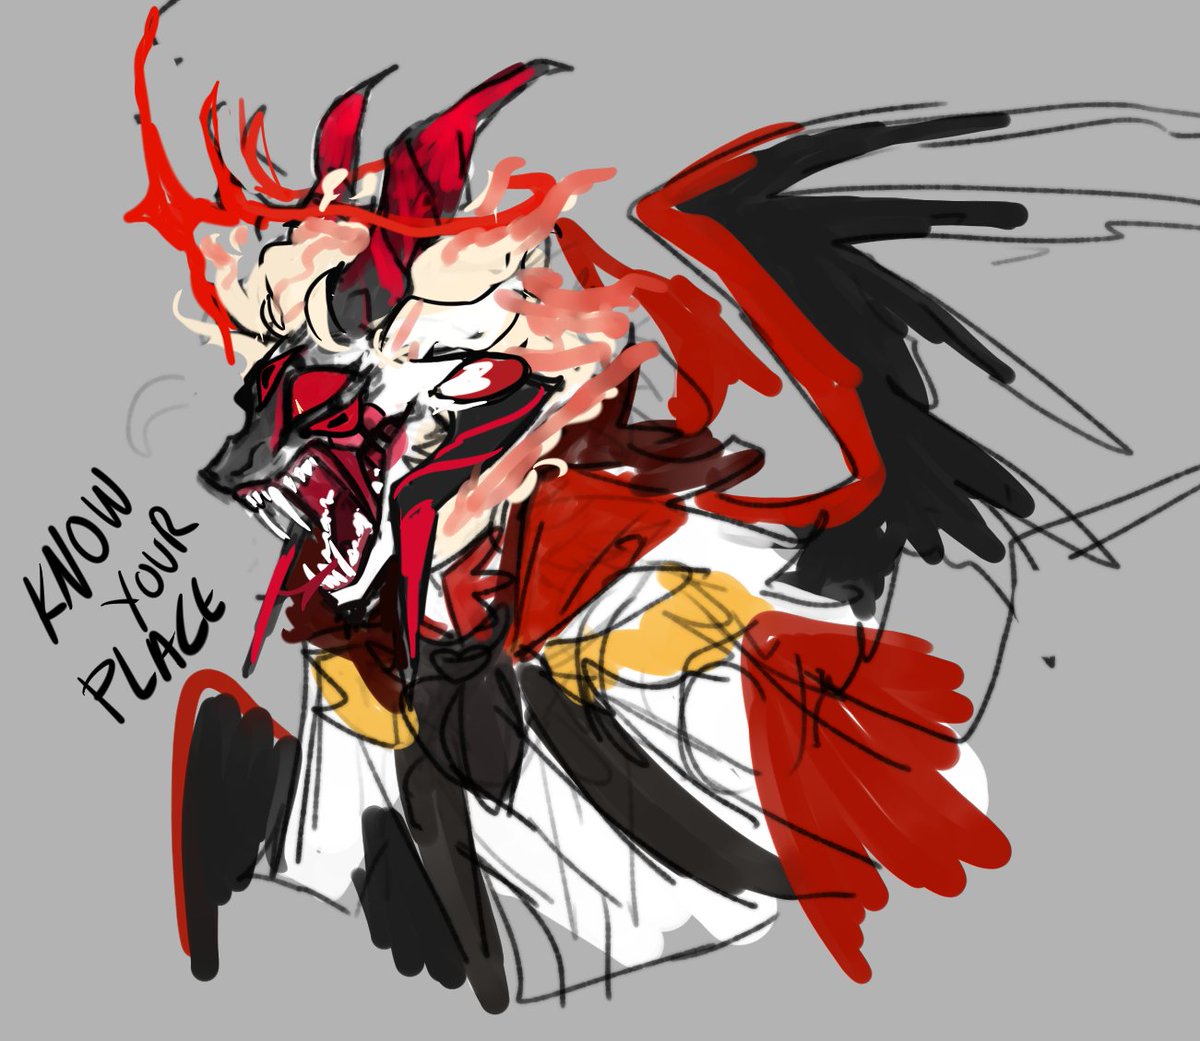 I'm trying to design a demon form for Lucifer.